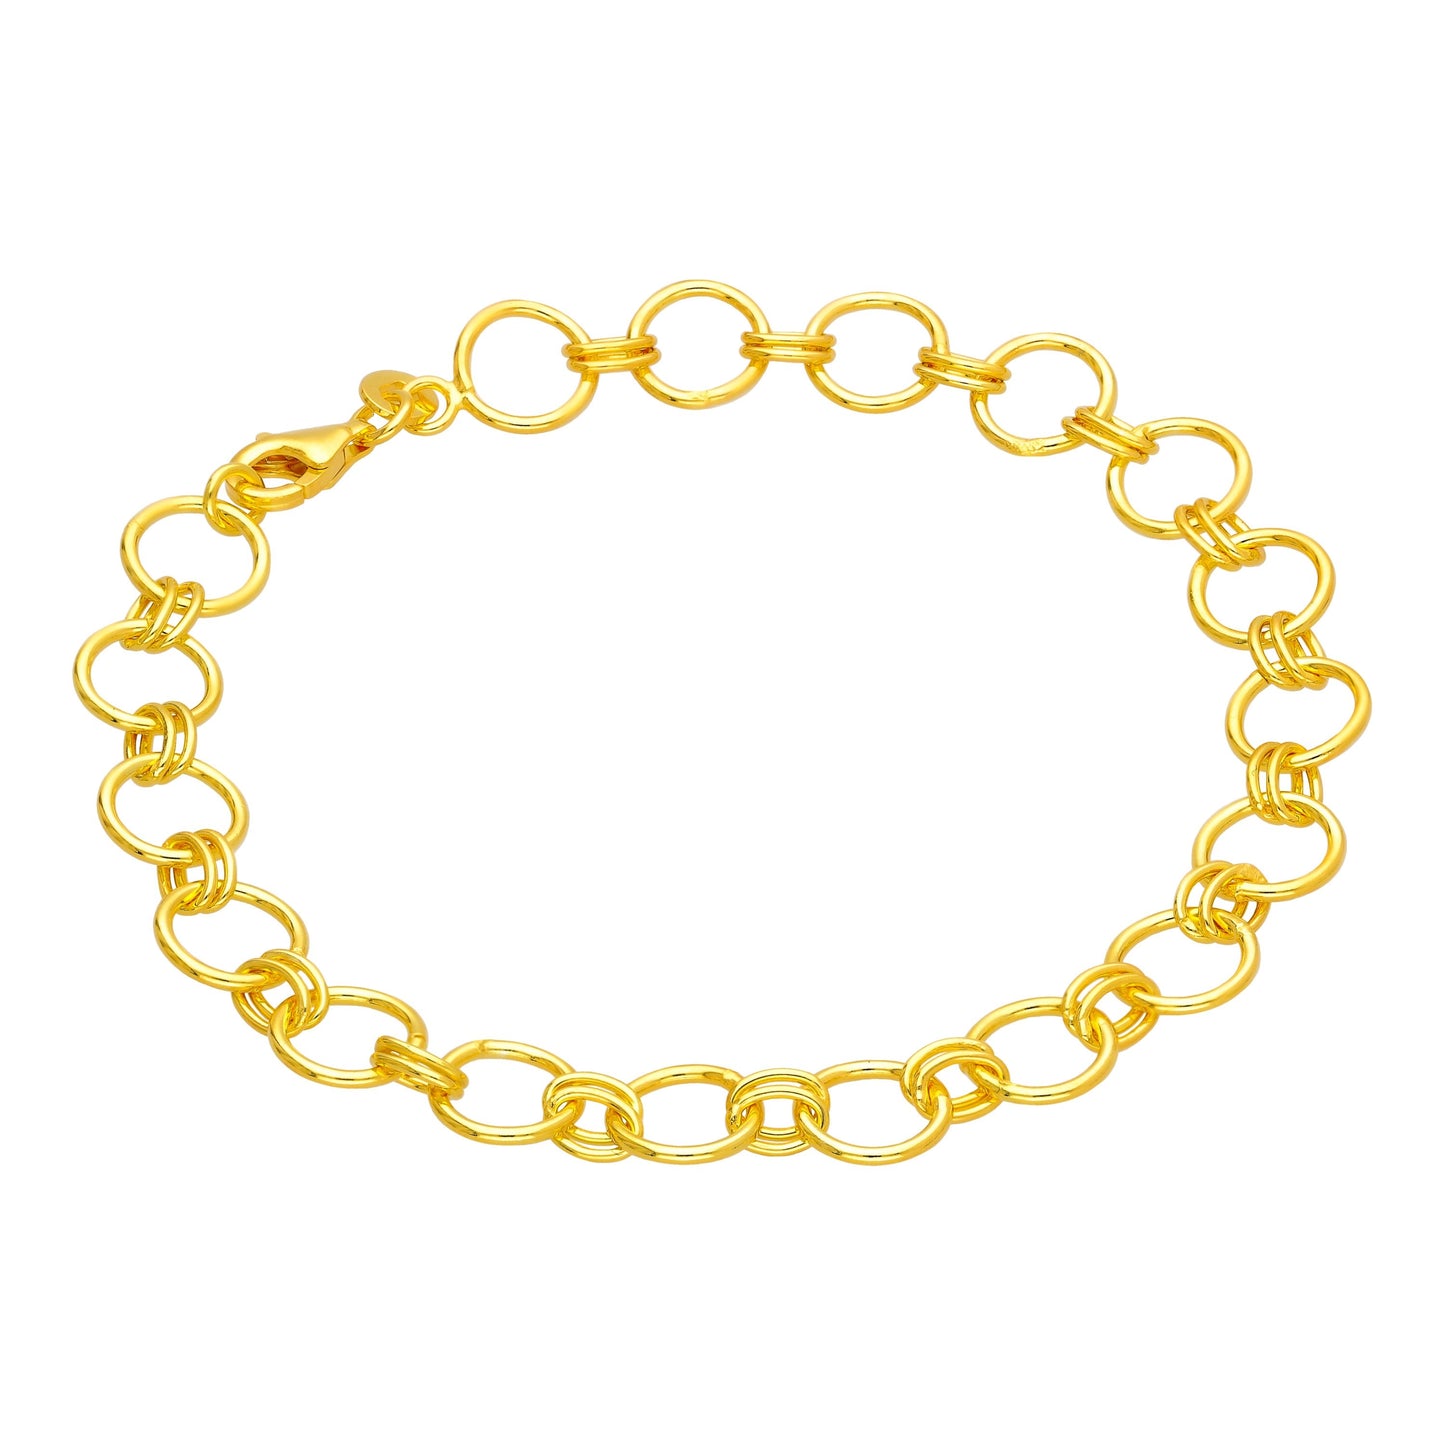 Gold Plated Sterling Silver Round Link Chain Bracelet 7 Inch